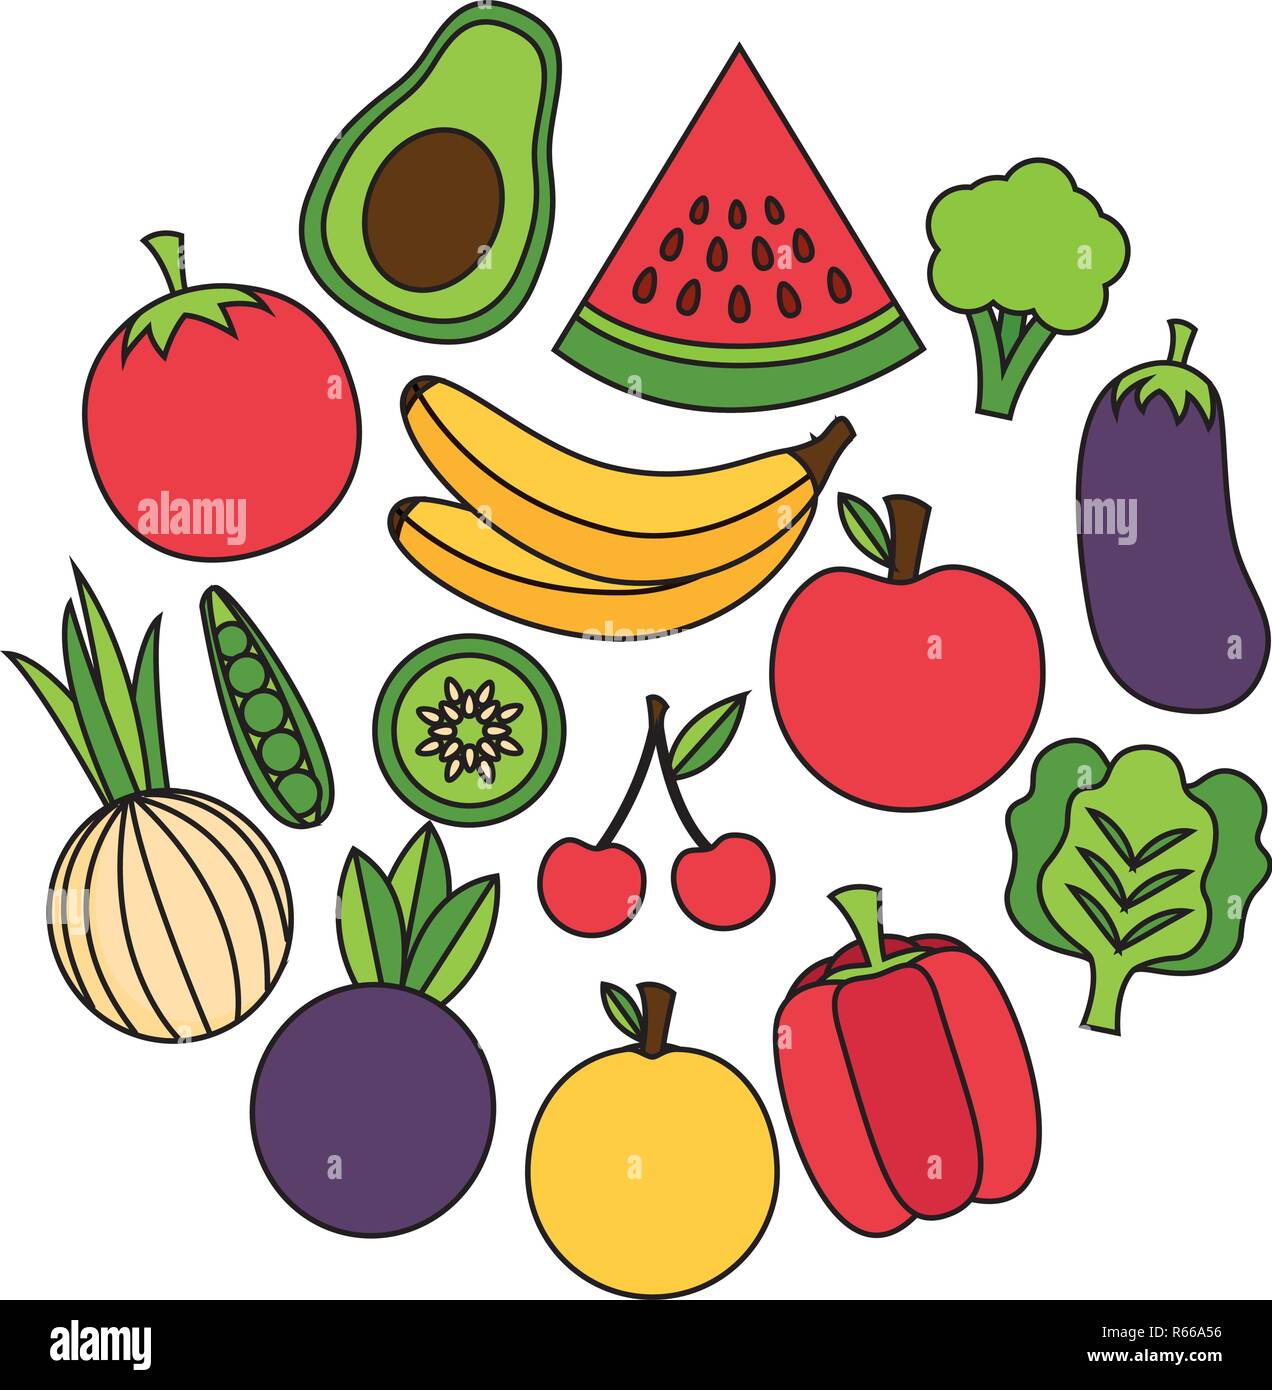 Free: Fun healthy food sticker collection - nohat.cc-saigonsouth.com.vn